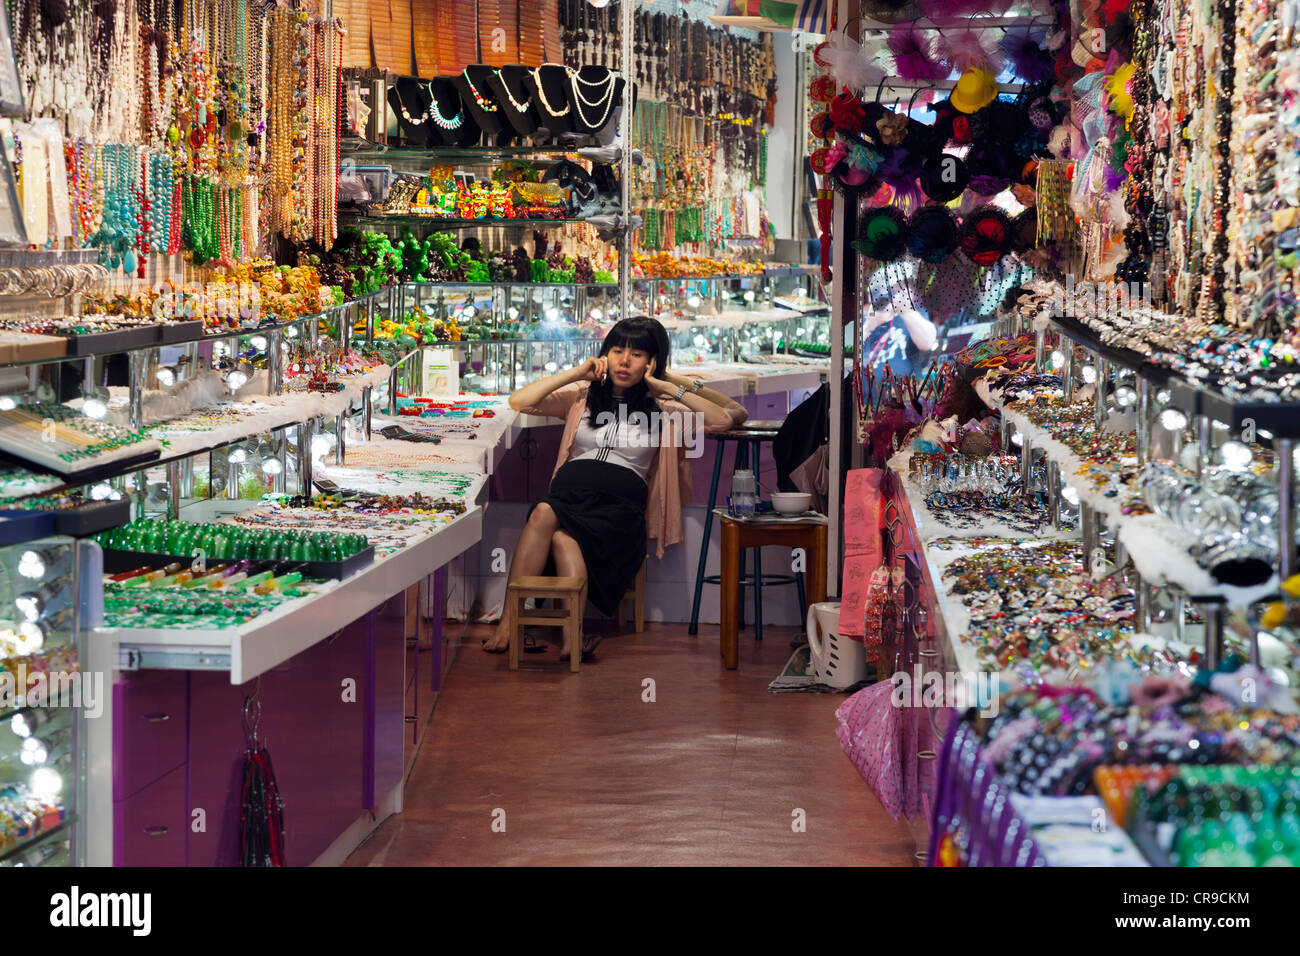 Stall - Keeper im Chat auf Handy in Stanley Market, Hong Kong Stockfoto